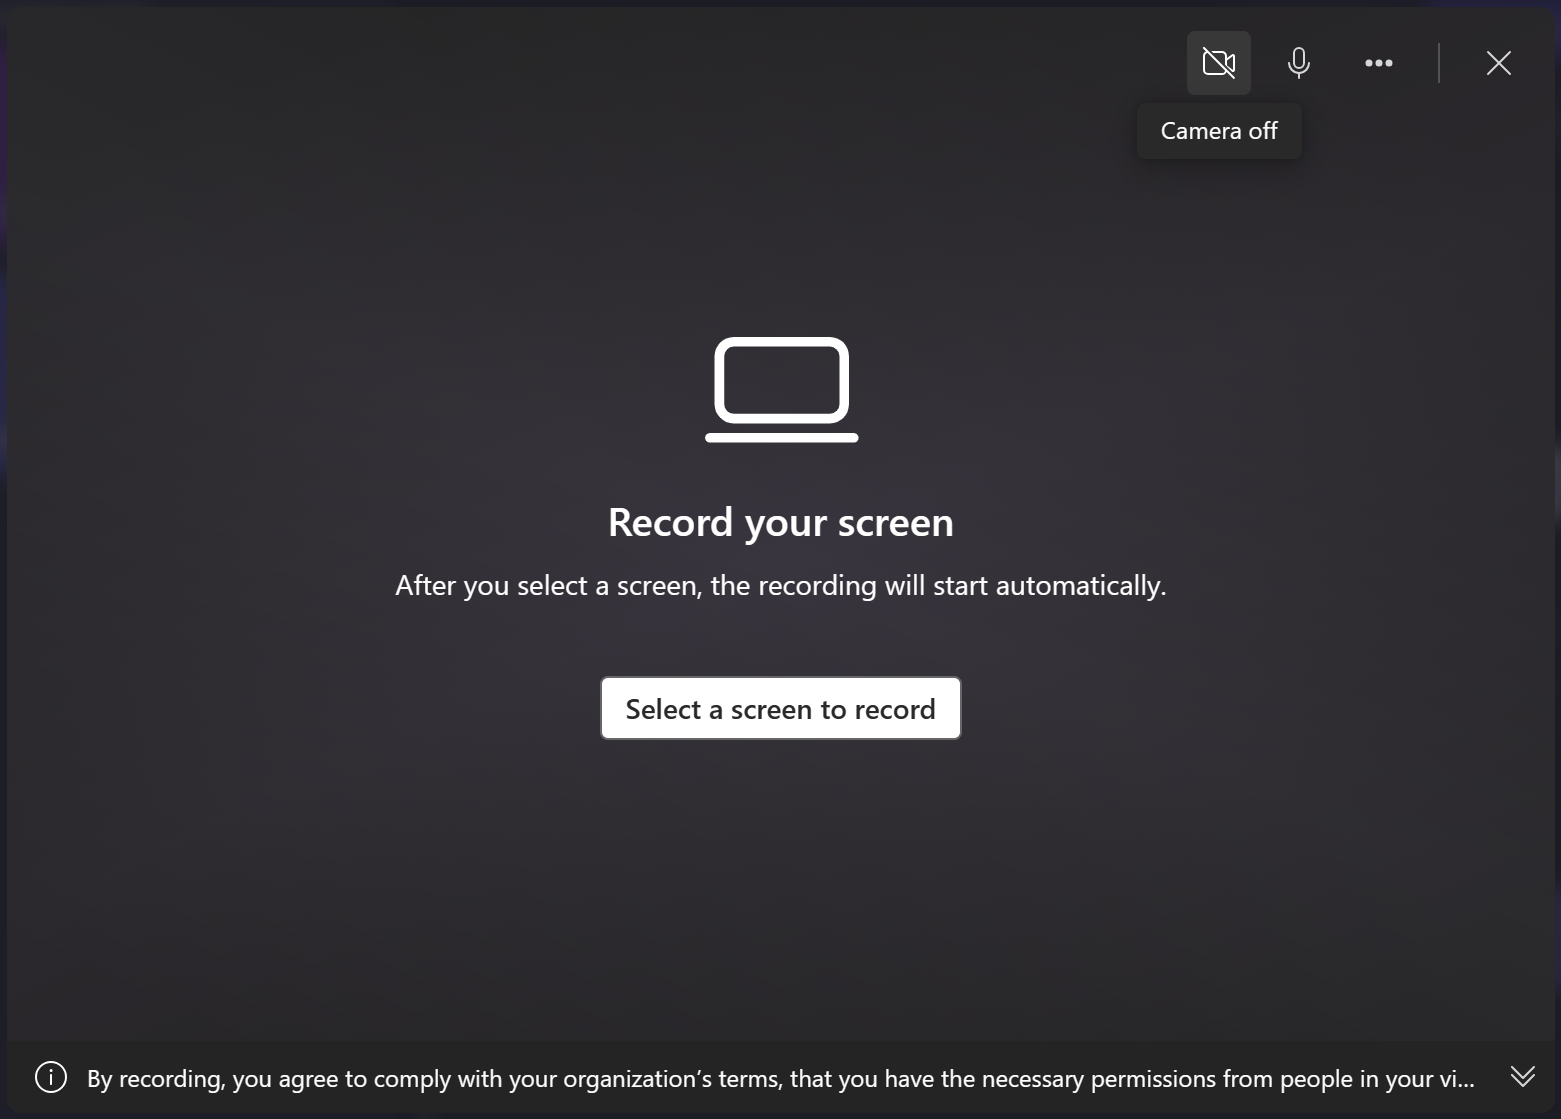 Select a screen or browser tab and enable or disable the camera to start a screen recording in Clipchamp's work version